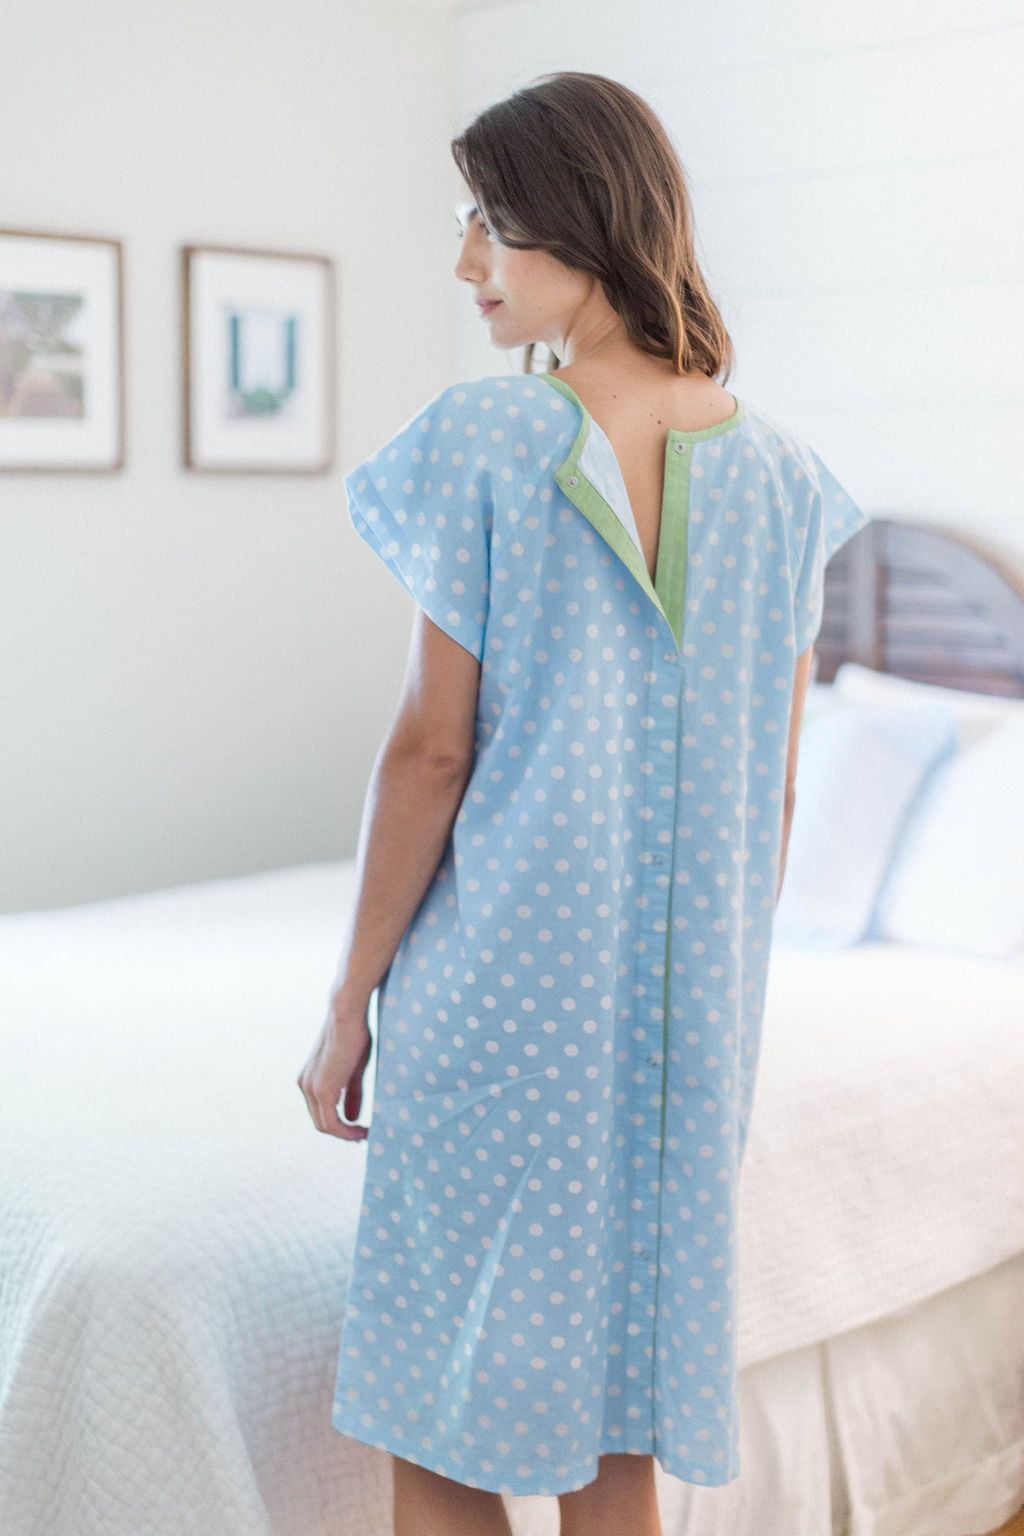 Profound Care Hospital Gown 6 Pack - Patient Gowns Fits Up to 2XL